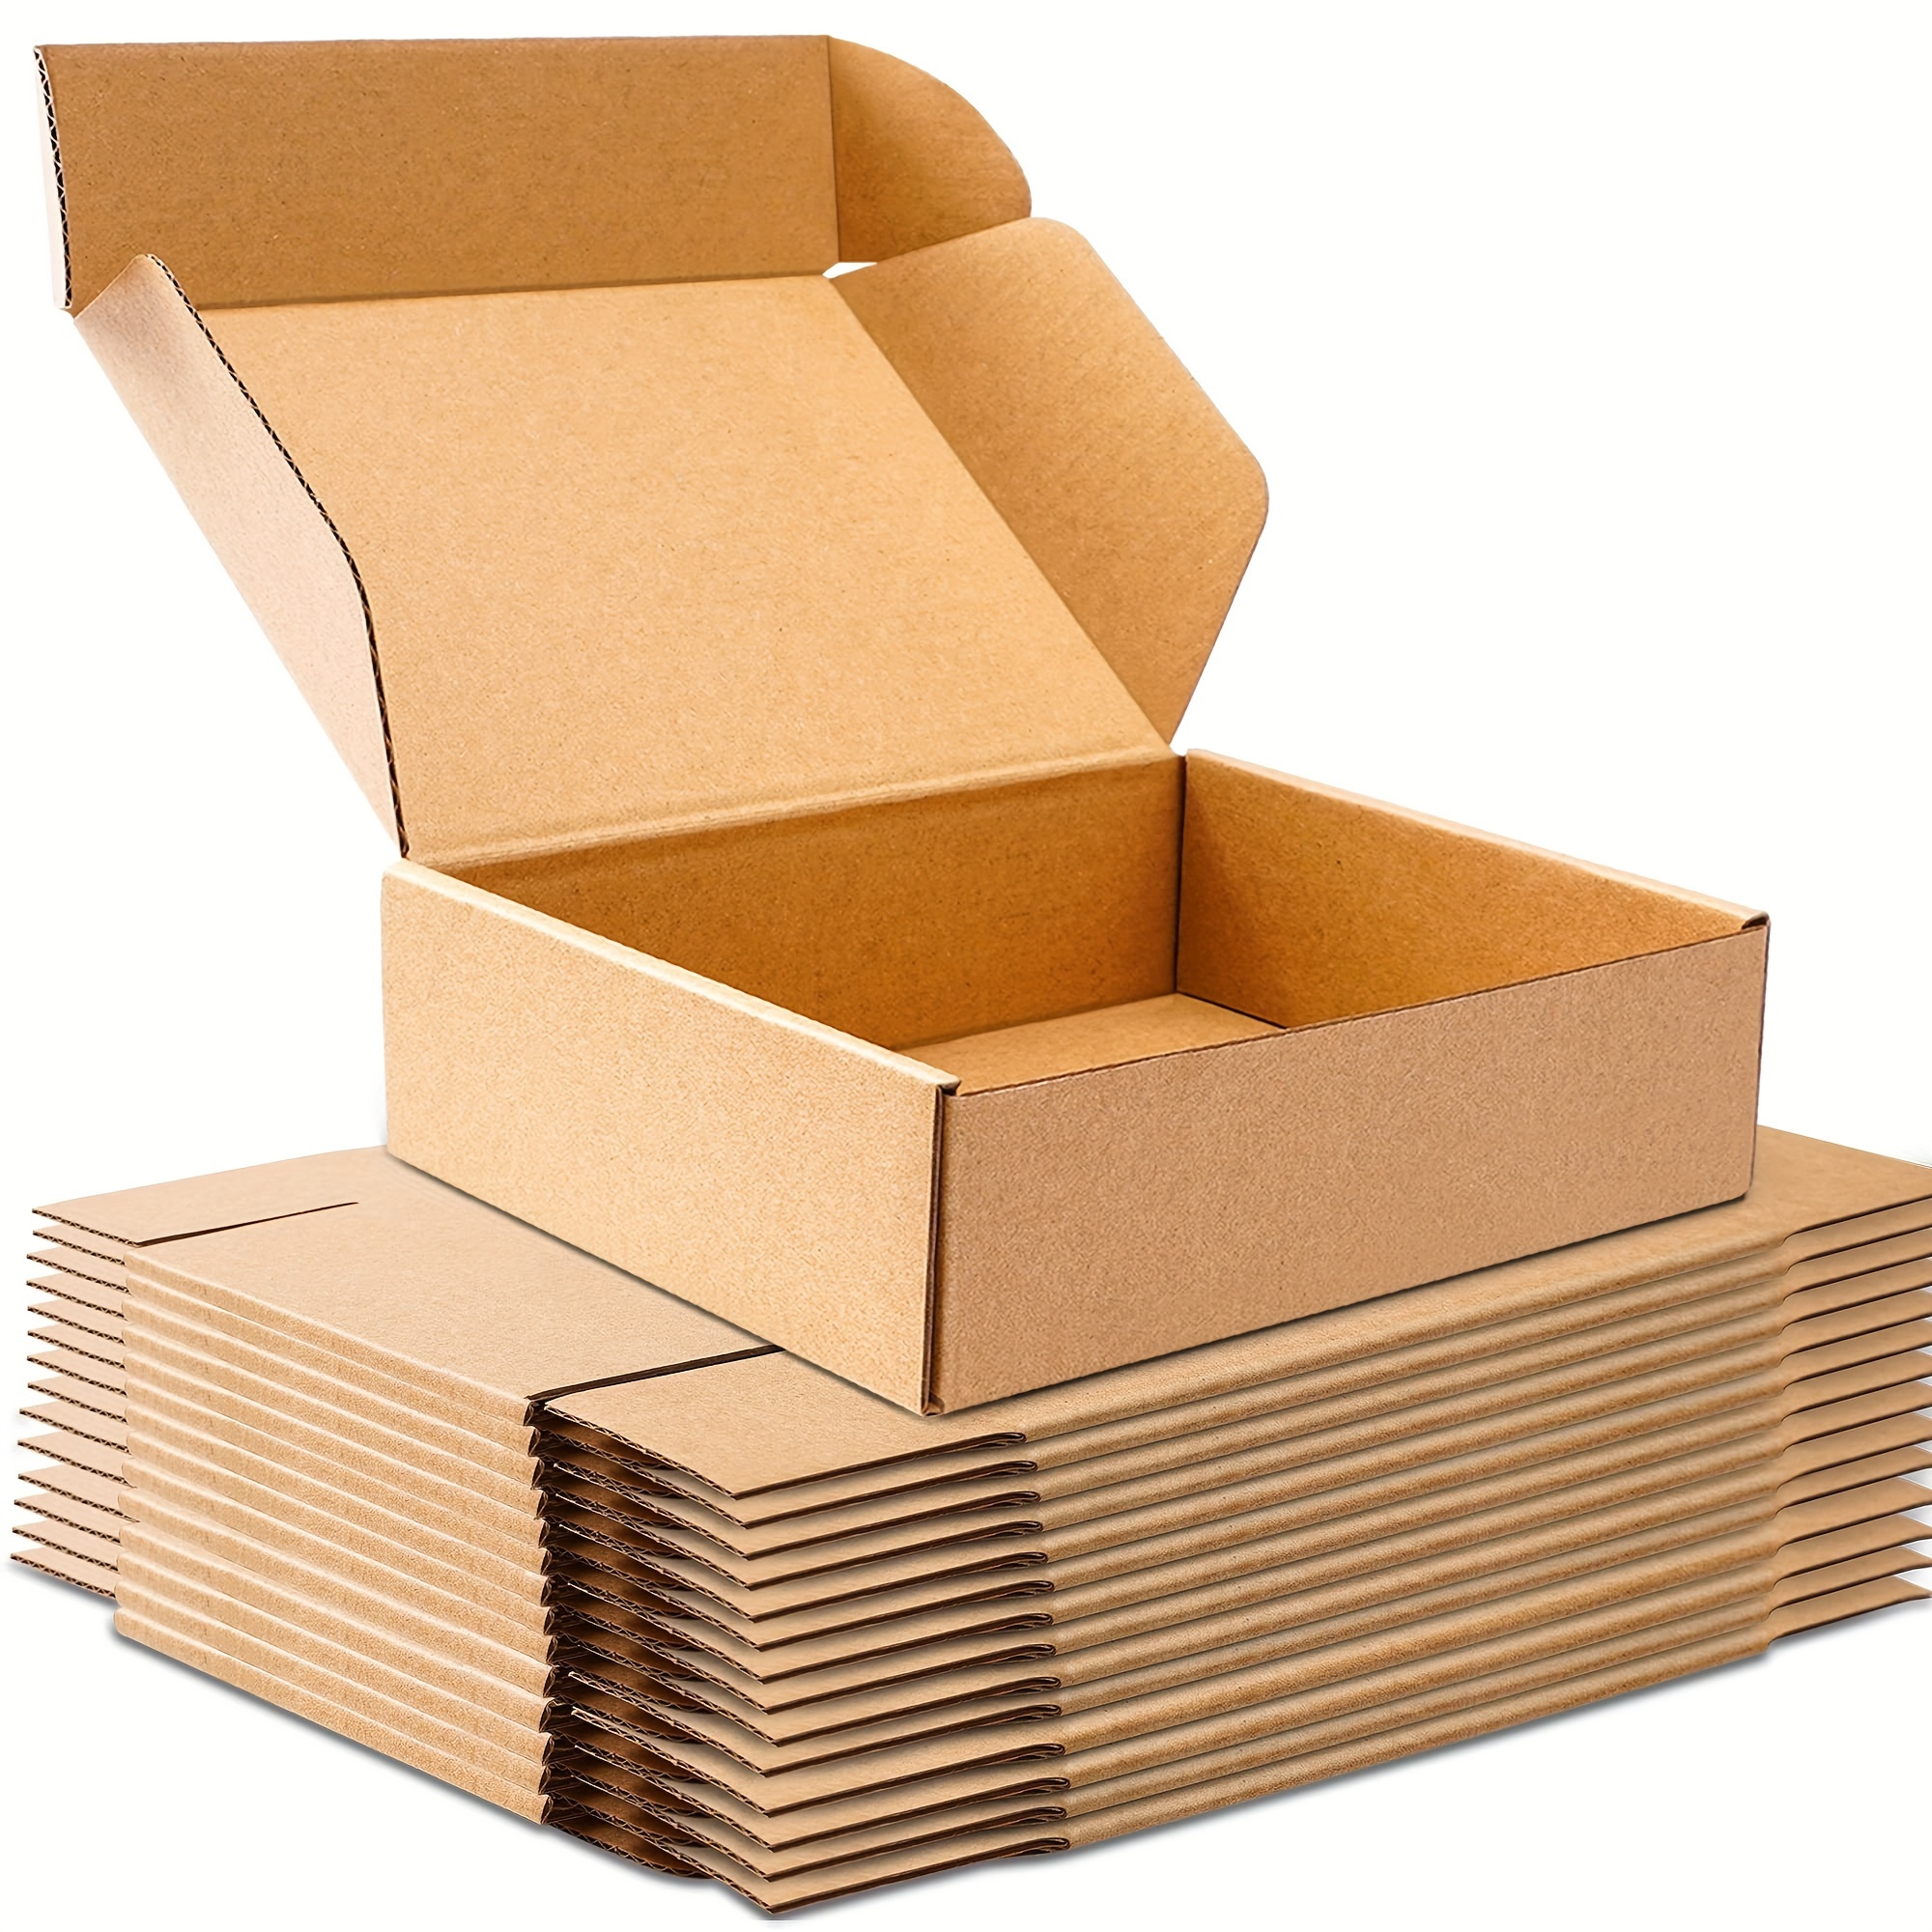 

20pcs Big Shipping Boxes, 9.7x7.7x2.7inches Moving Boxes Small Recyclable Burst Resistant High Strength Corrugated Cardboard Boxes For Small Business Packaging Mailing Literature